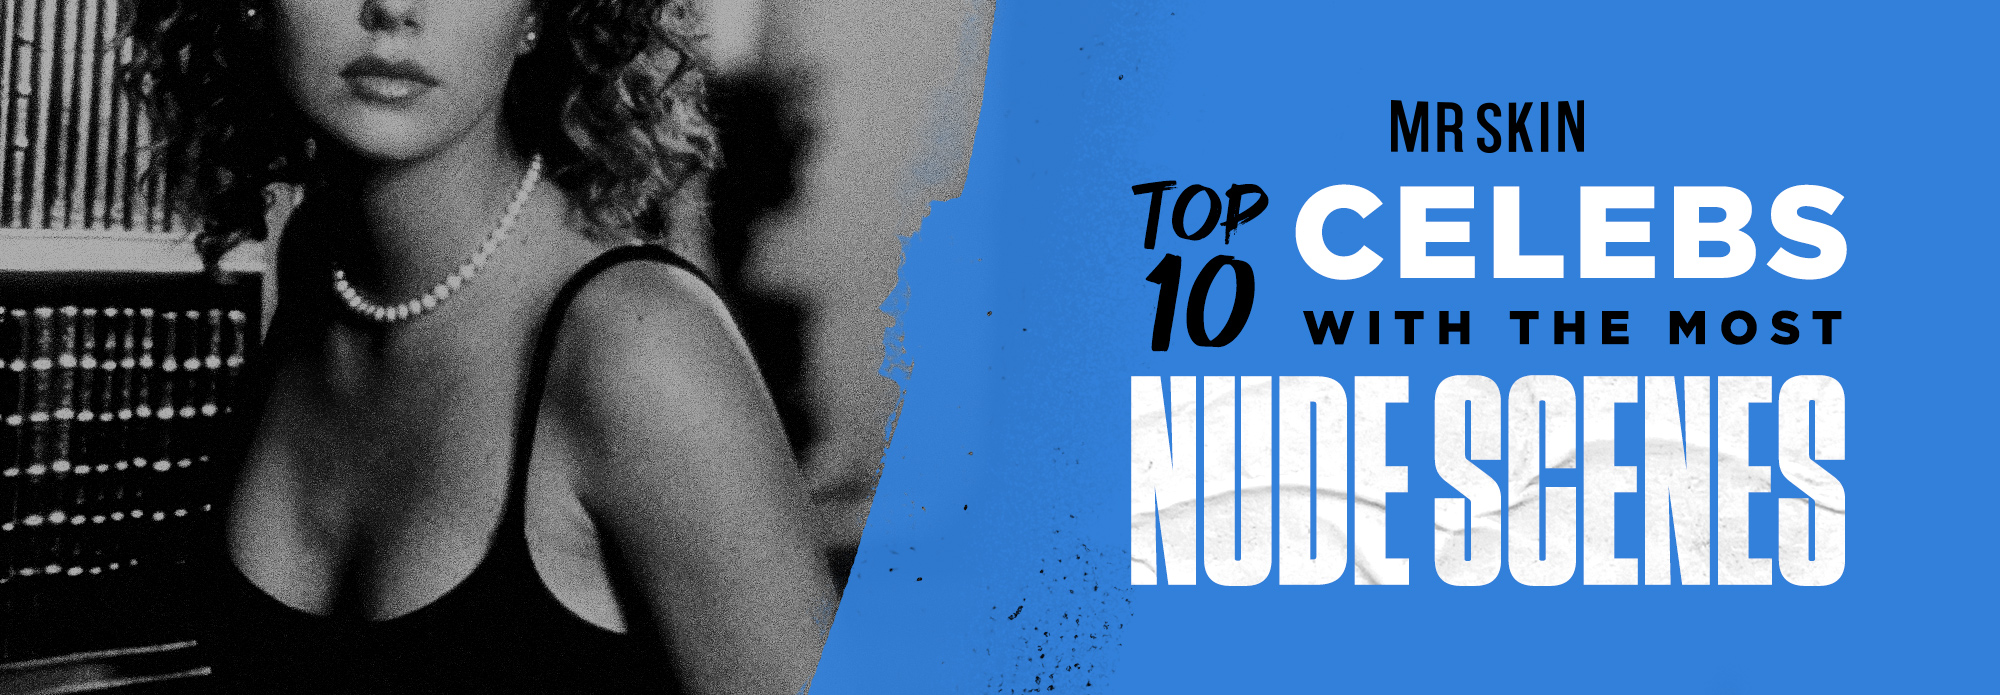 Sexy 60s Celebrity - Top 10 Actresses With Most Nude Scenes | Mr. Skin